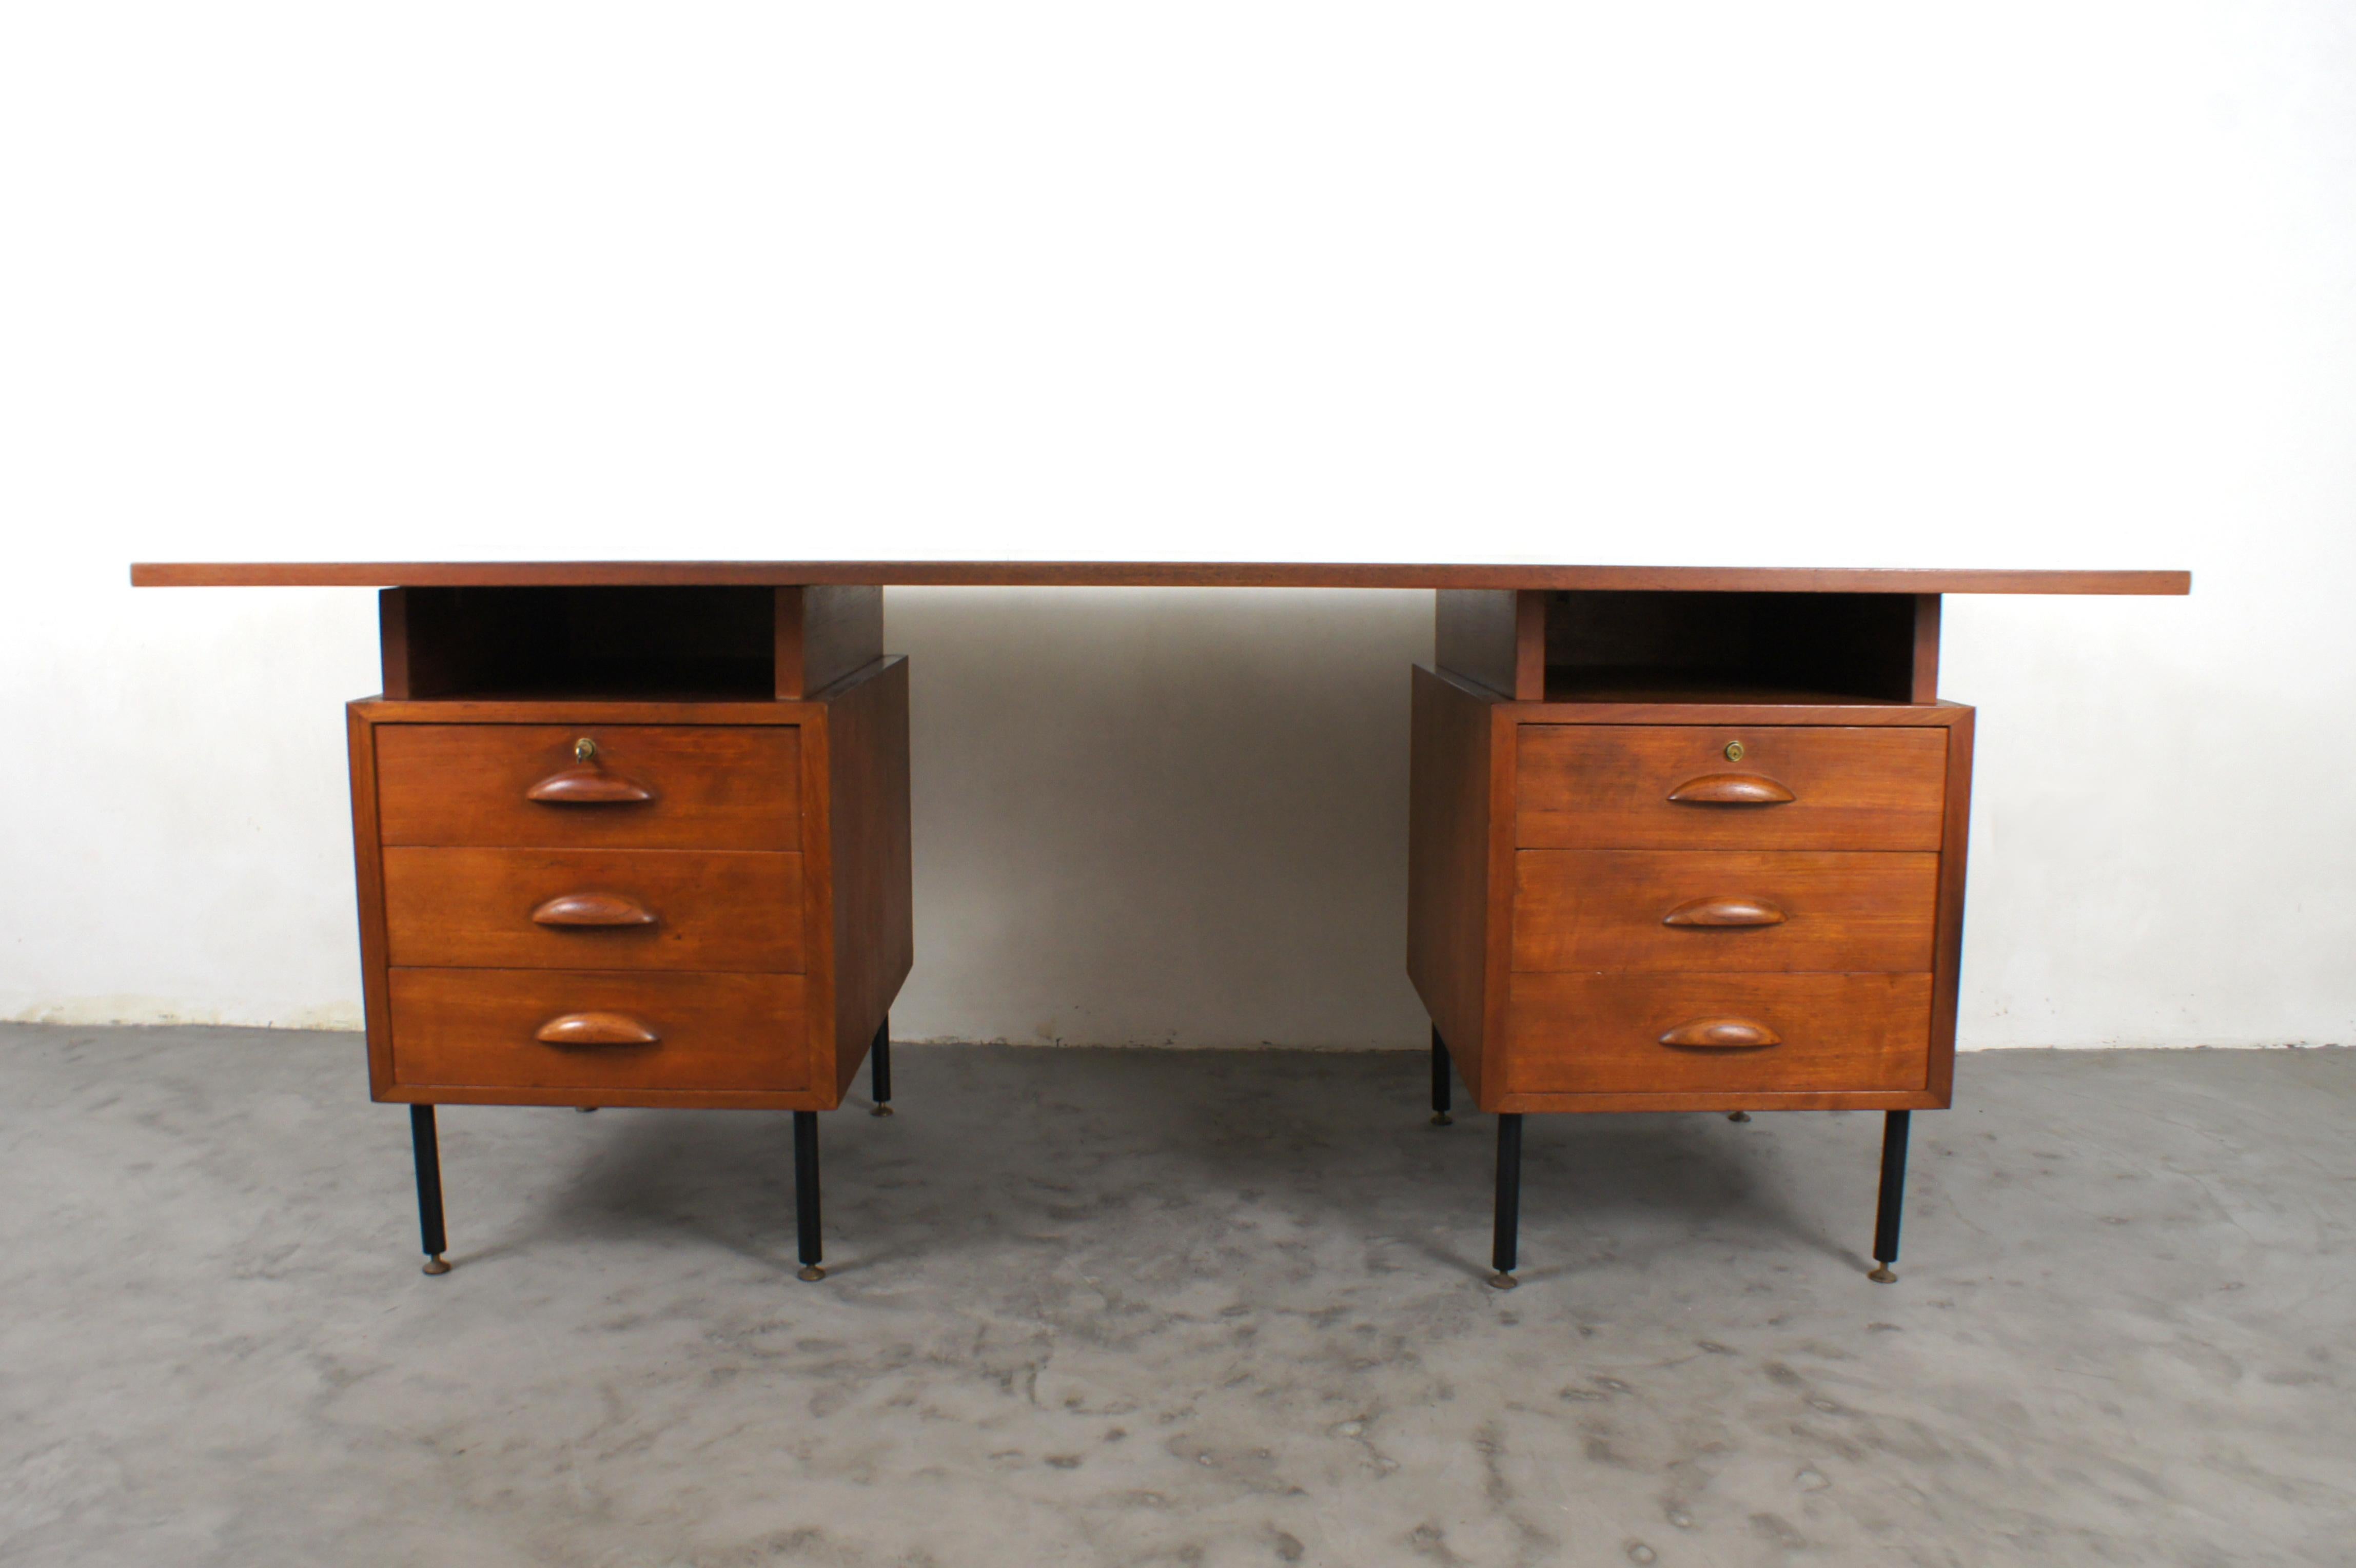 Large Italian-made executive desk from the early 1950s.

Dark blue formica(original) covered worktop in excellent condition, resting on two walnut wood 'towers' with black metal legs and adjustable brass feet.

Each tower has 3 drawers and an open